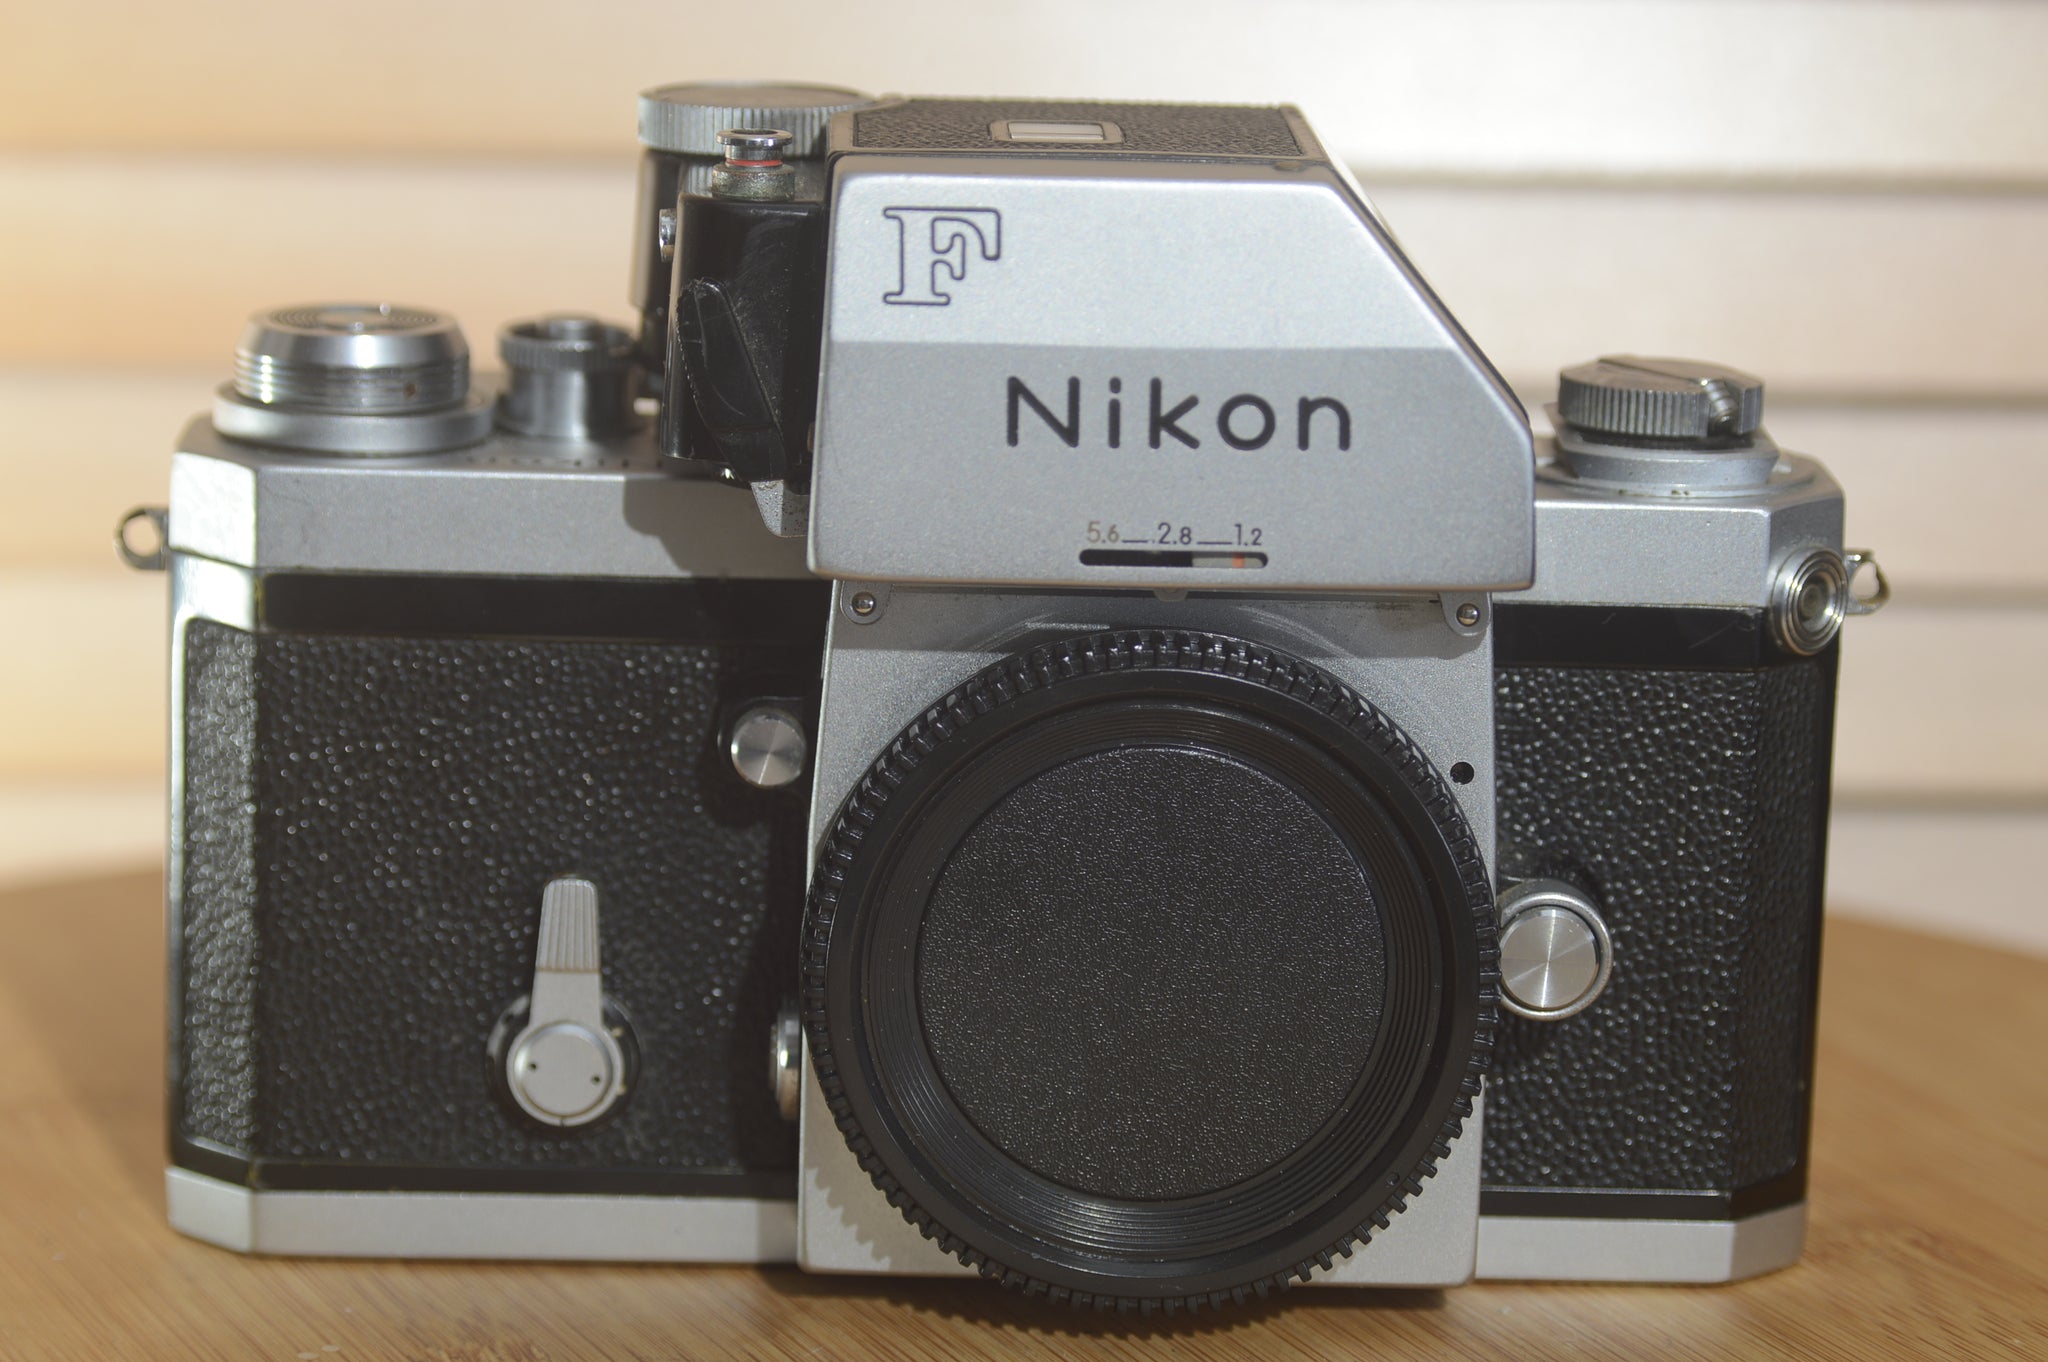 Nikon F 35mm SLR Camera with FTN Photomic Prism. A truly wonderful camera. - RewindCameras quality vintage cameras, fully tested and serviced